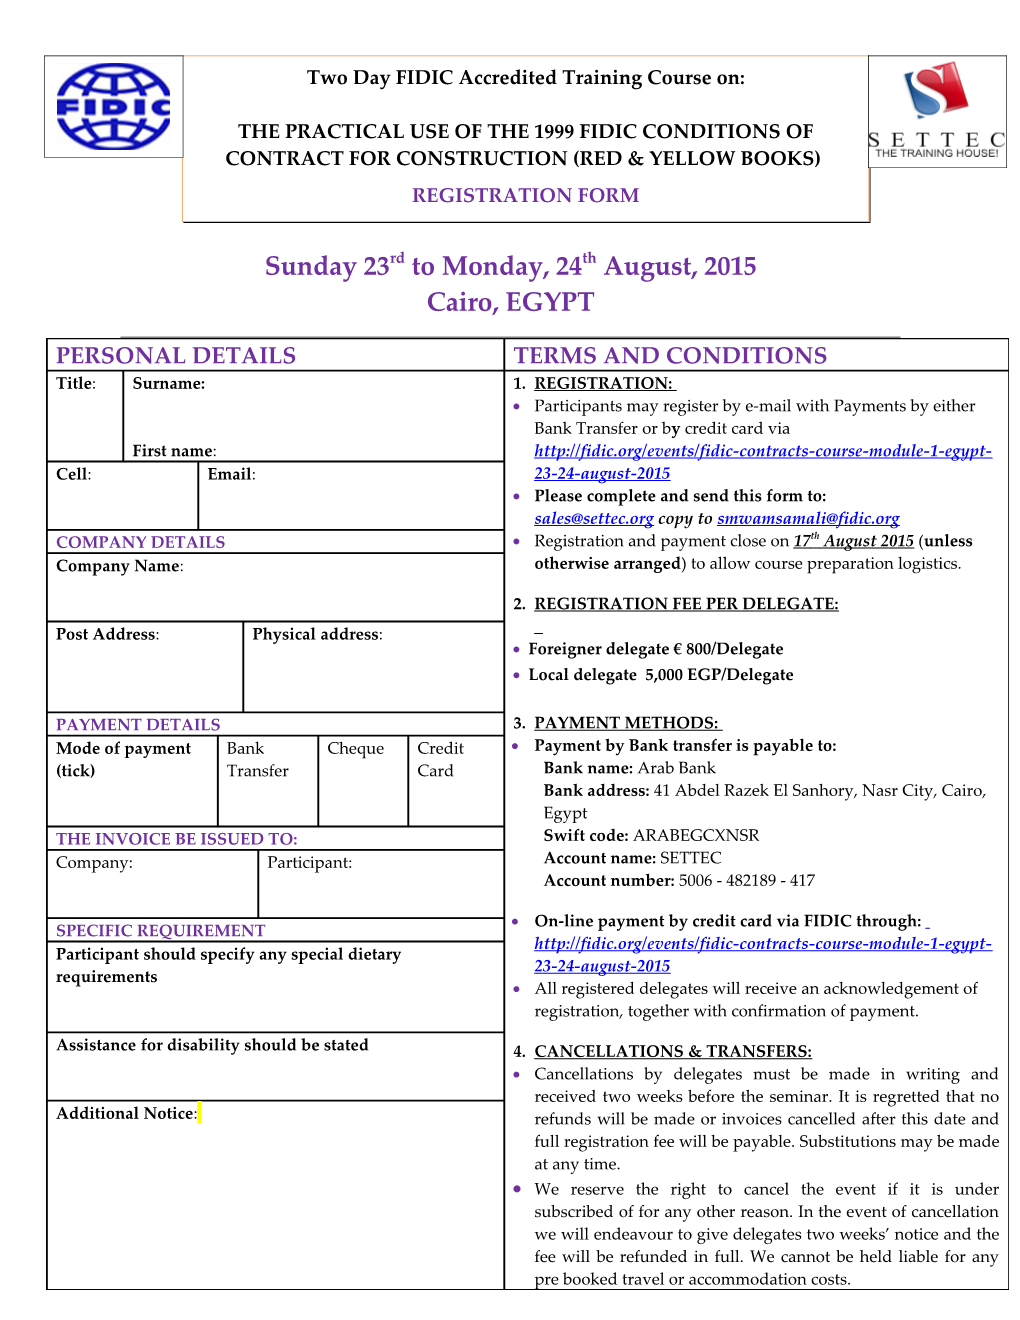 Please Complete and Send This Form To